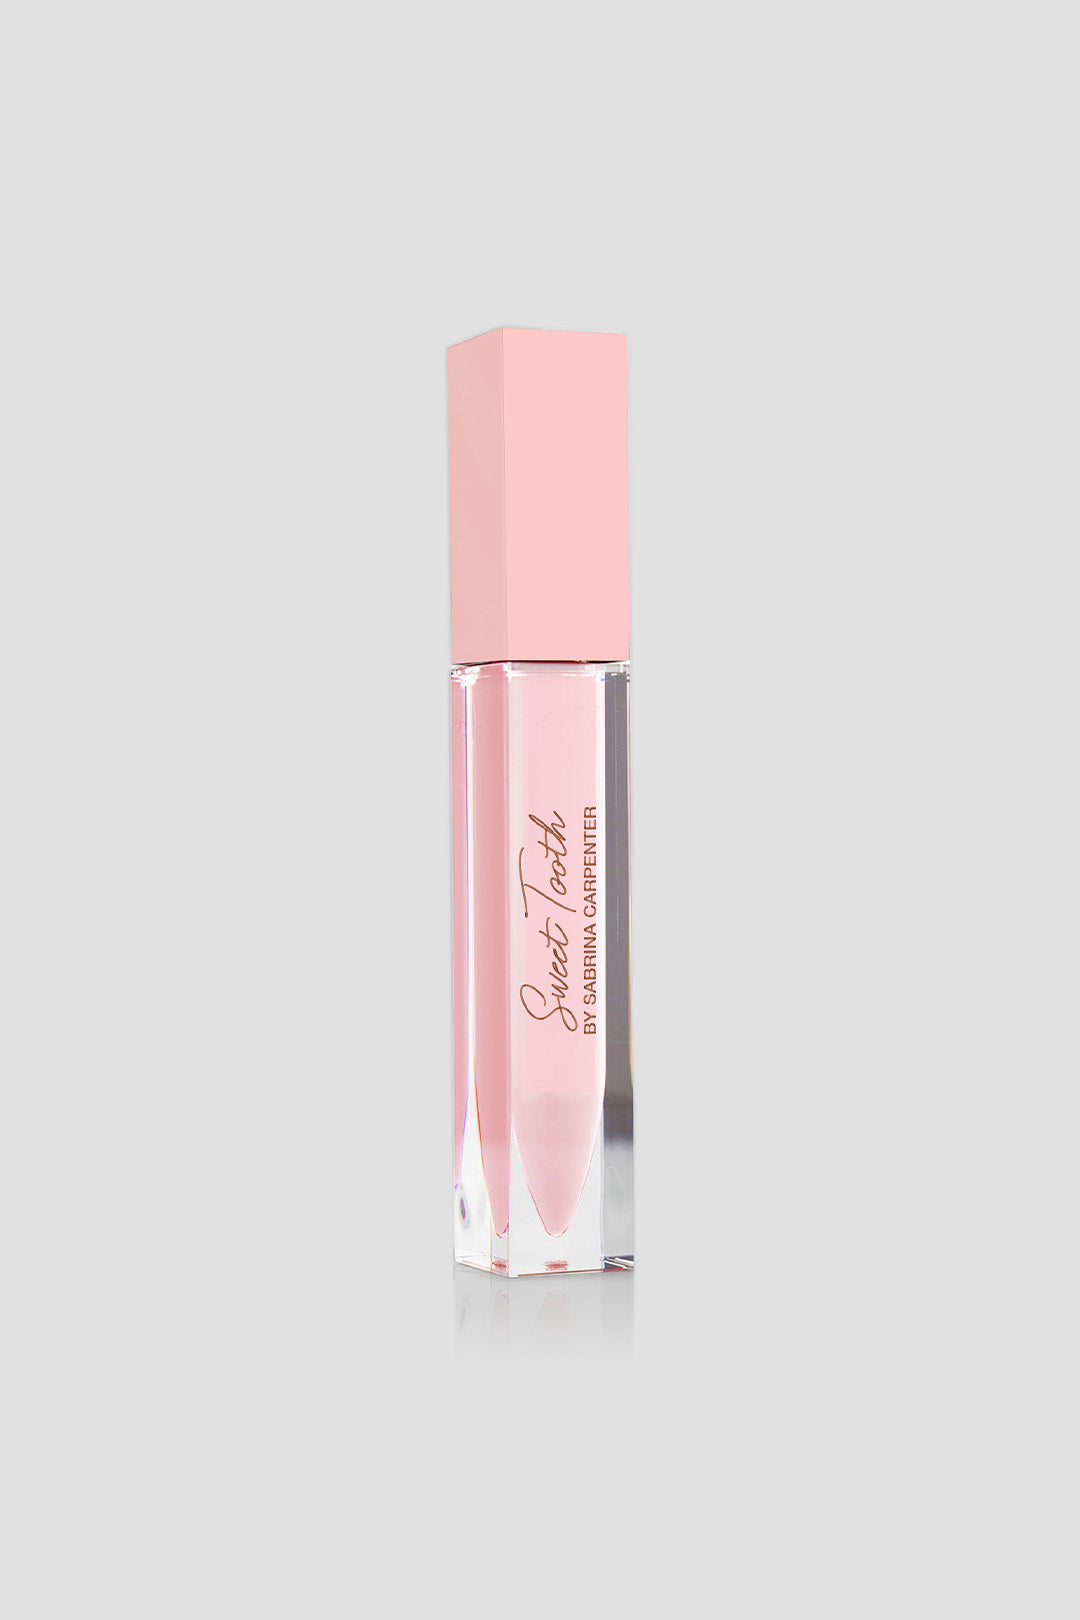 SWEET TOOTH LIP GLOSS - SCENT BEAUTY